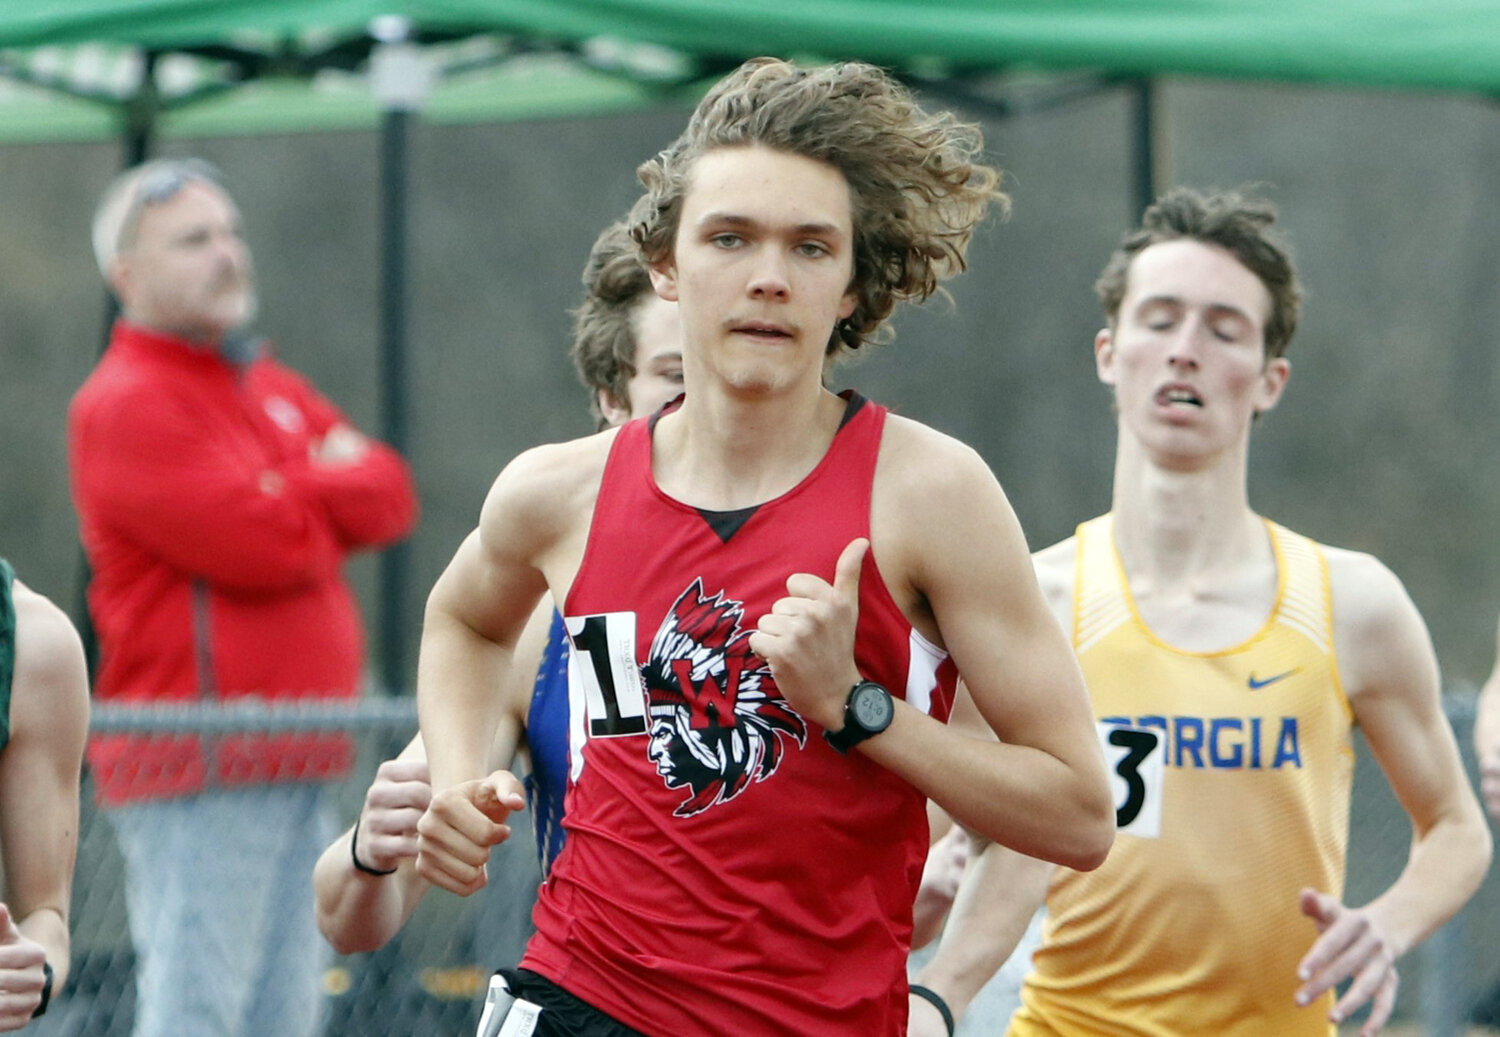 Warrenton's Wyatt Claiborne competes at the Wright City Warm Up Meet earlier this season. Claiborne won the 3200-meter run at the Ft. Zumwalt North Invite last week.